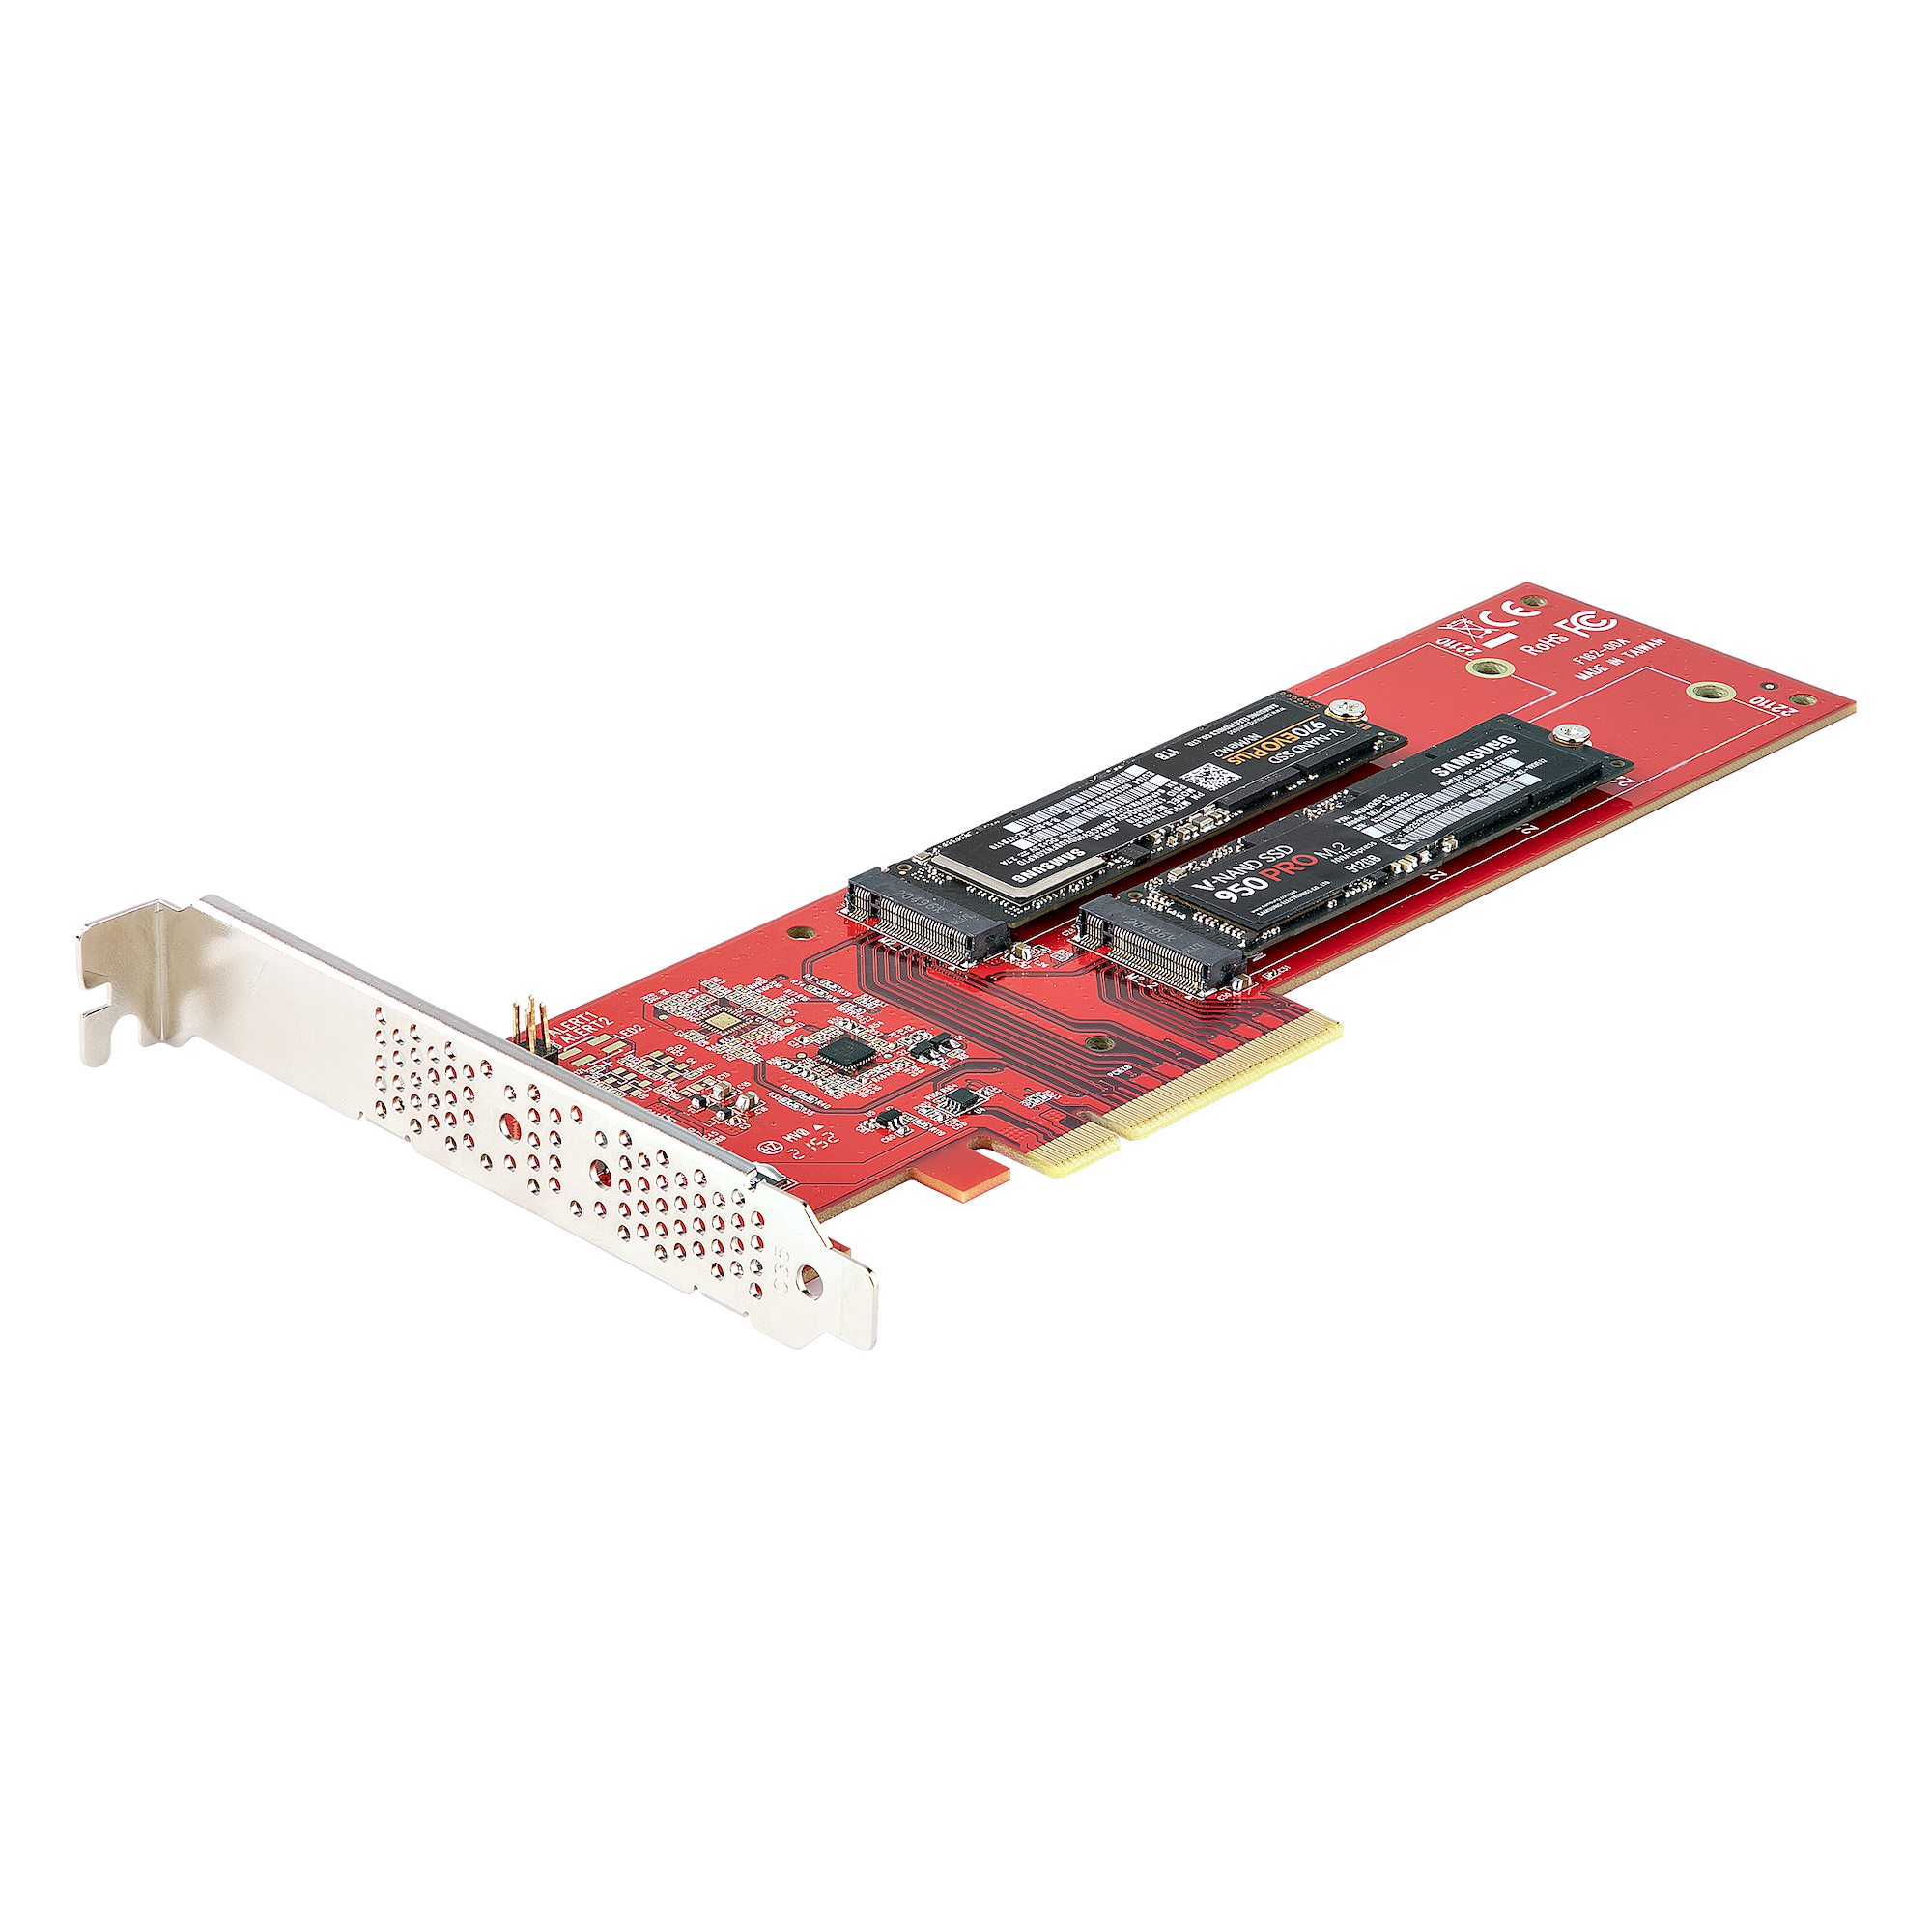 Dual M.2 PCIe SSD Adapter, NVMe / AHCI - Adapters and Converters | StarTech.com